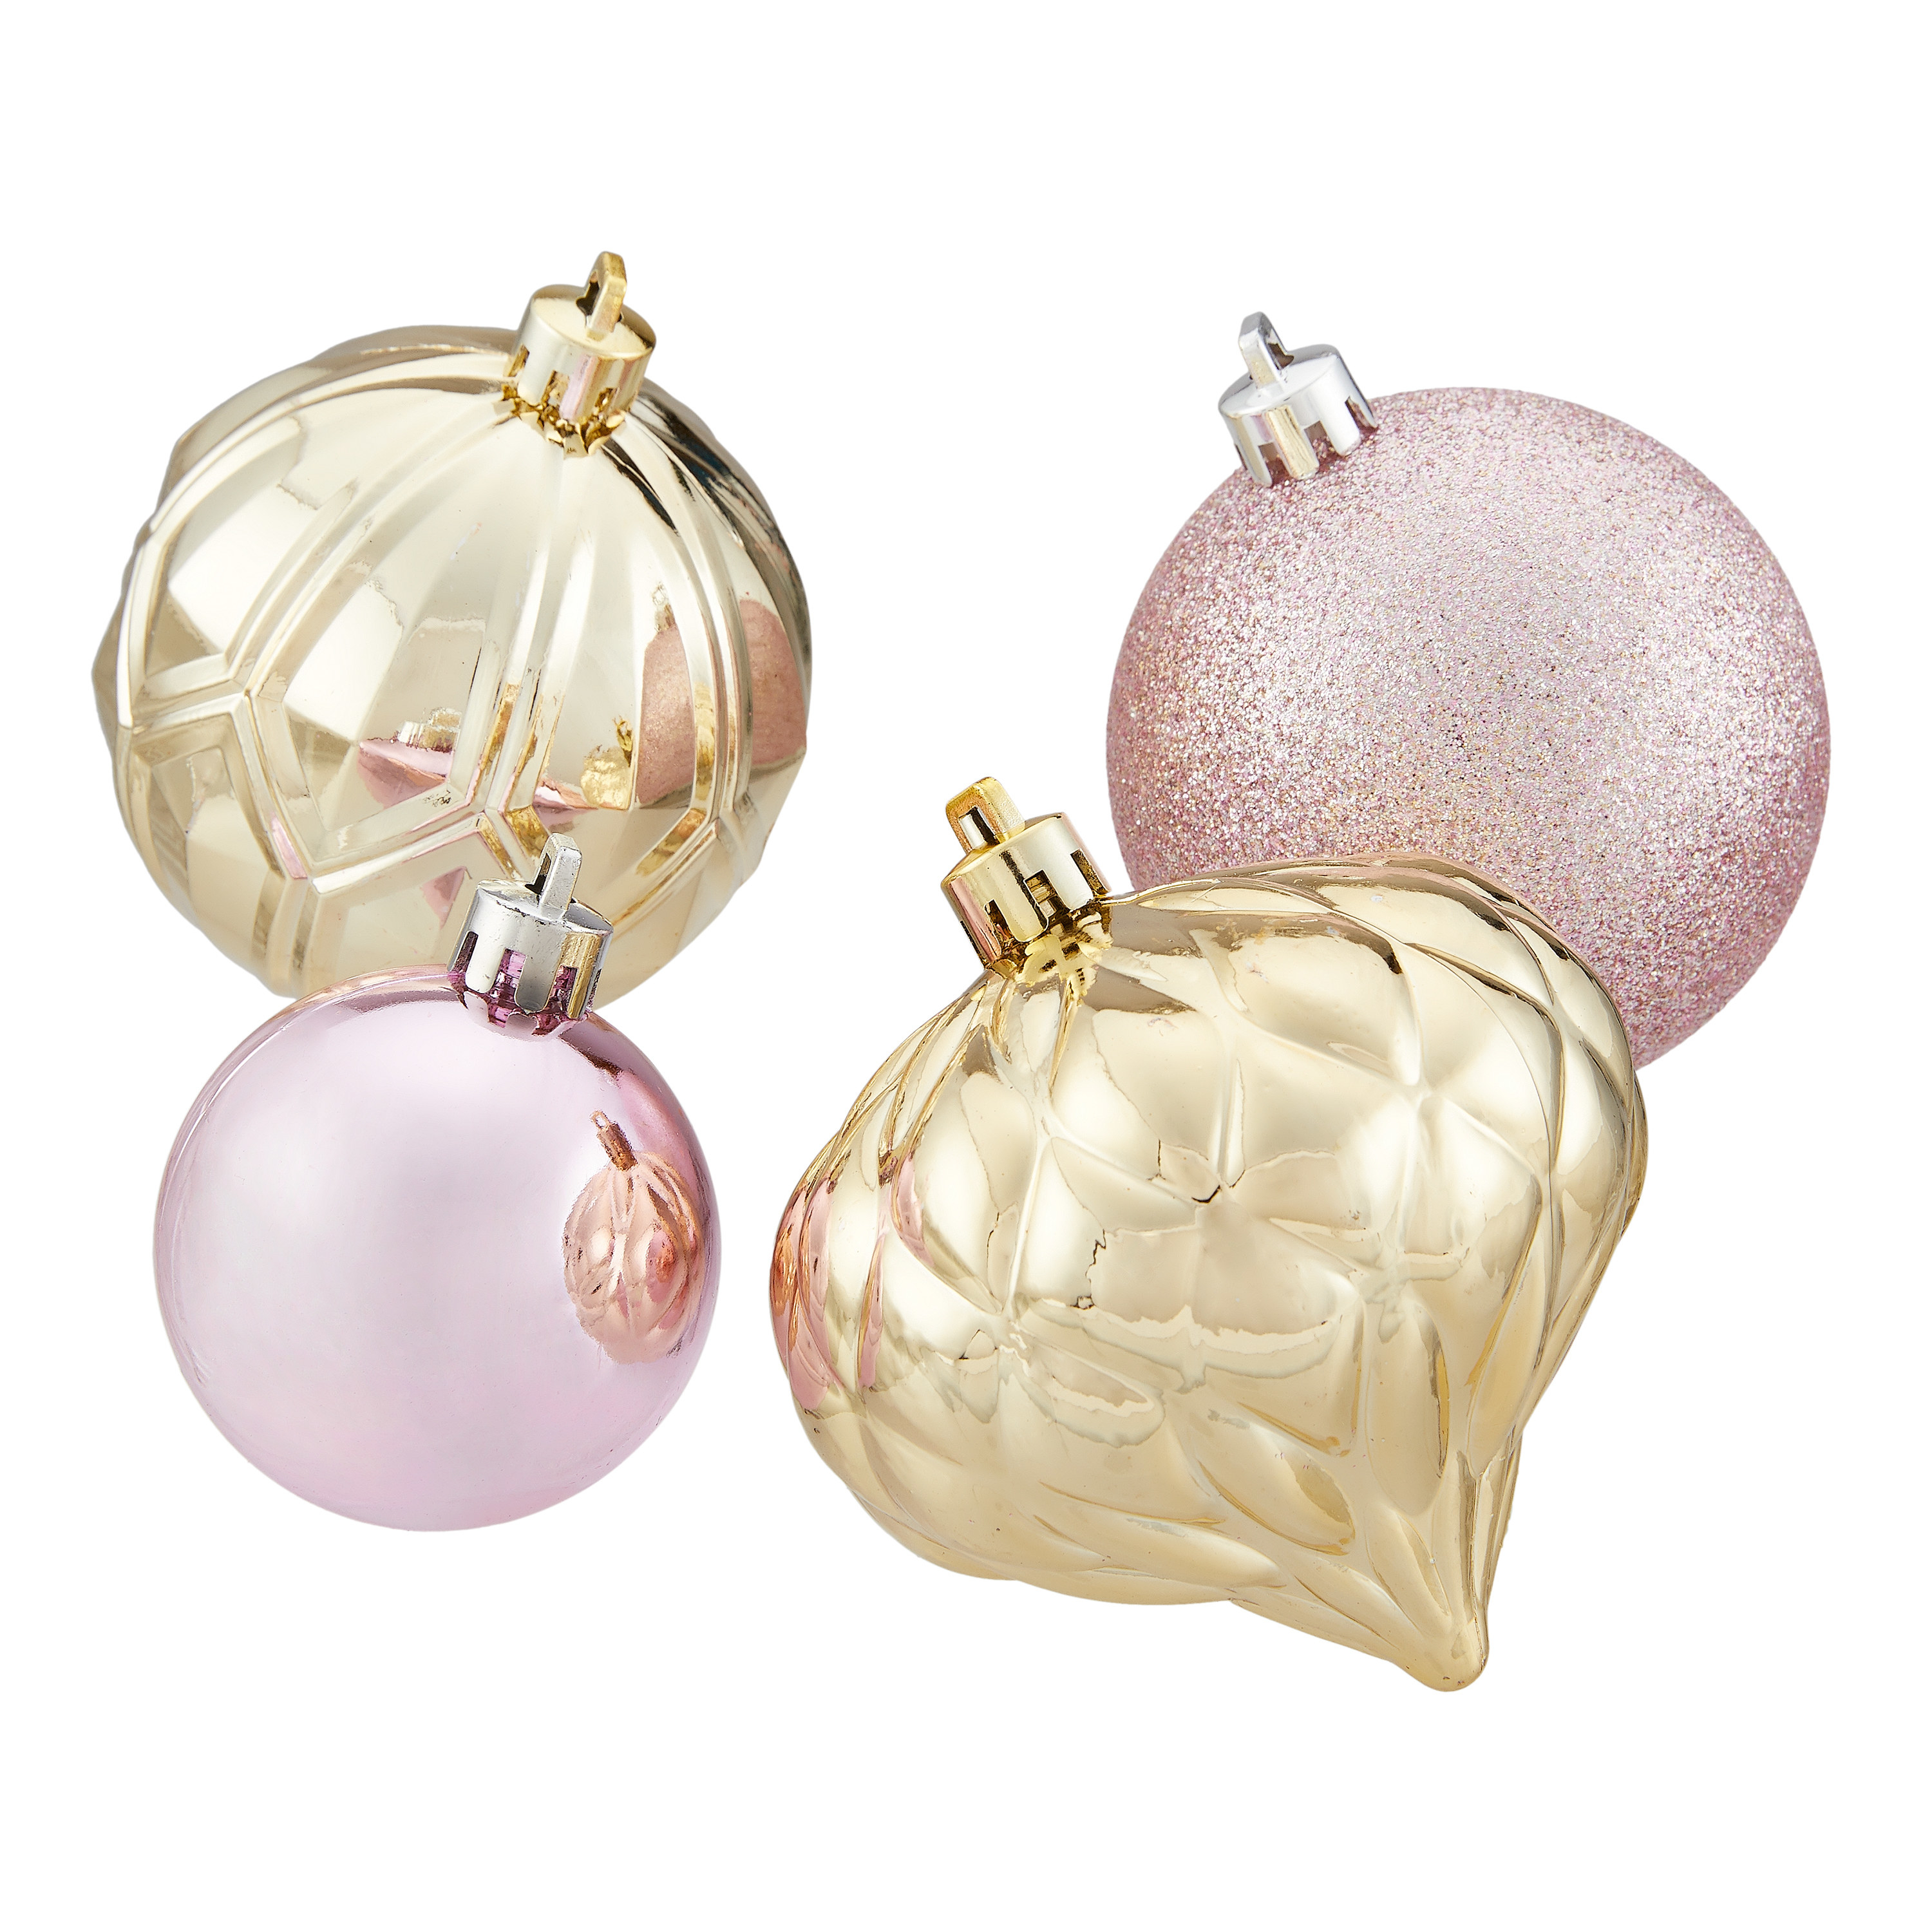 The set of four shatter-proof ornaments in pink and gold